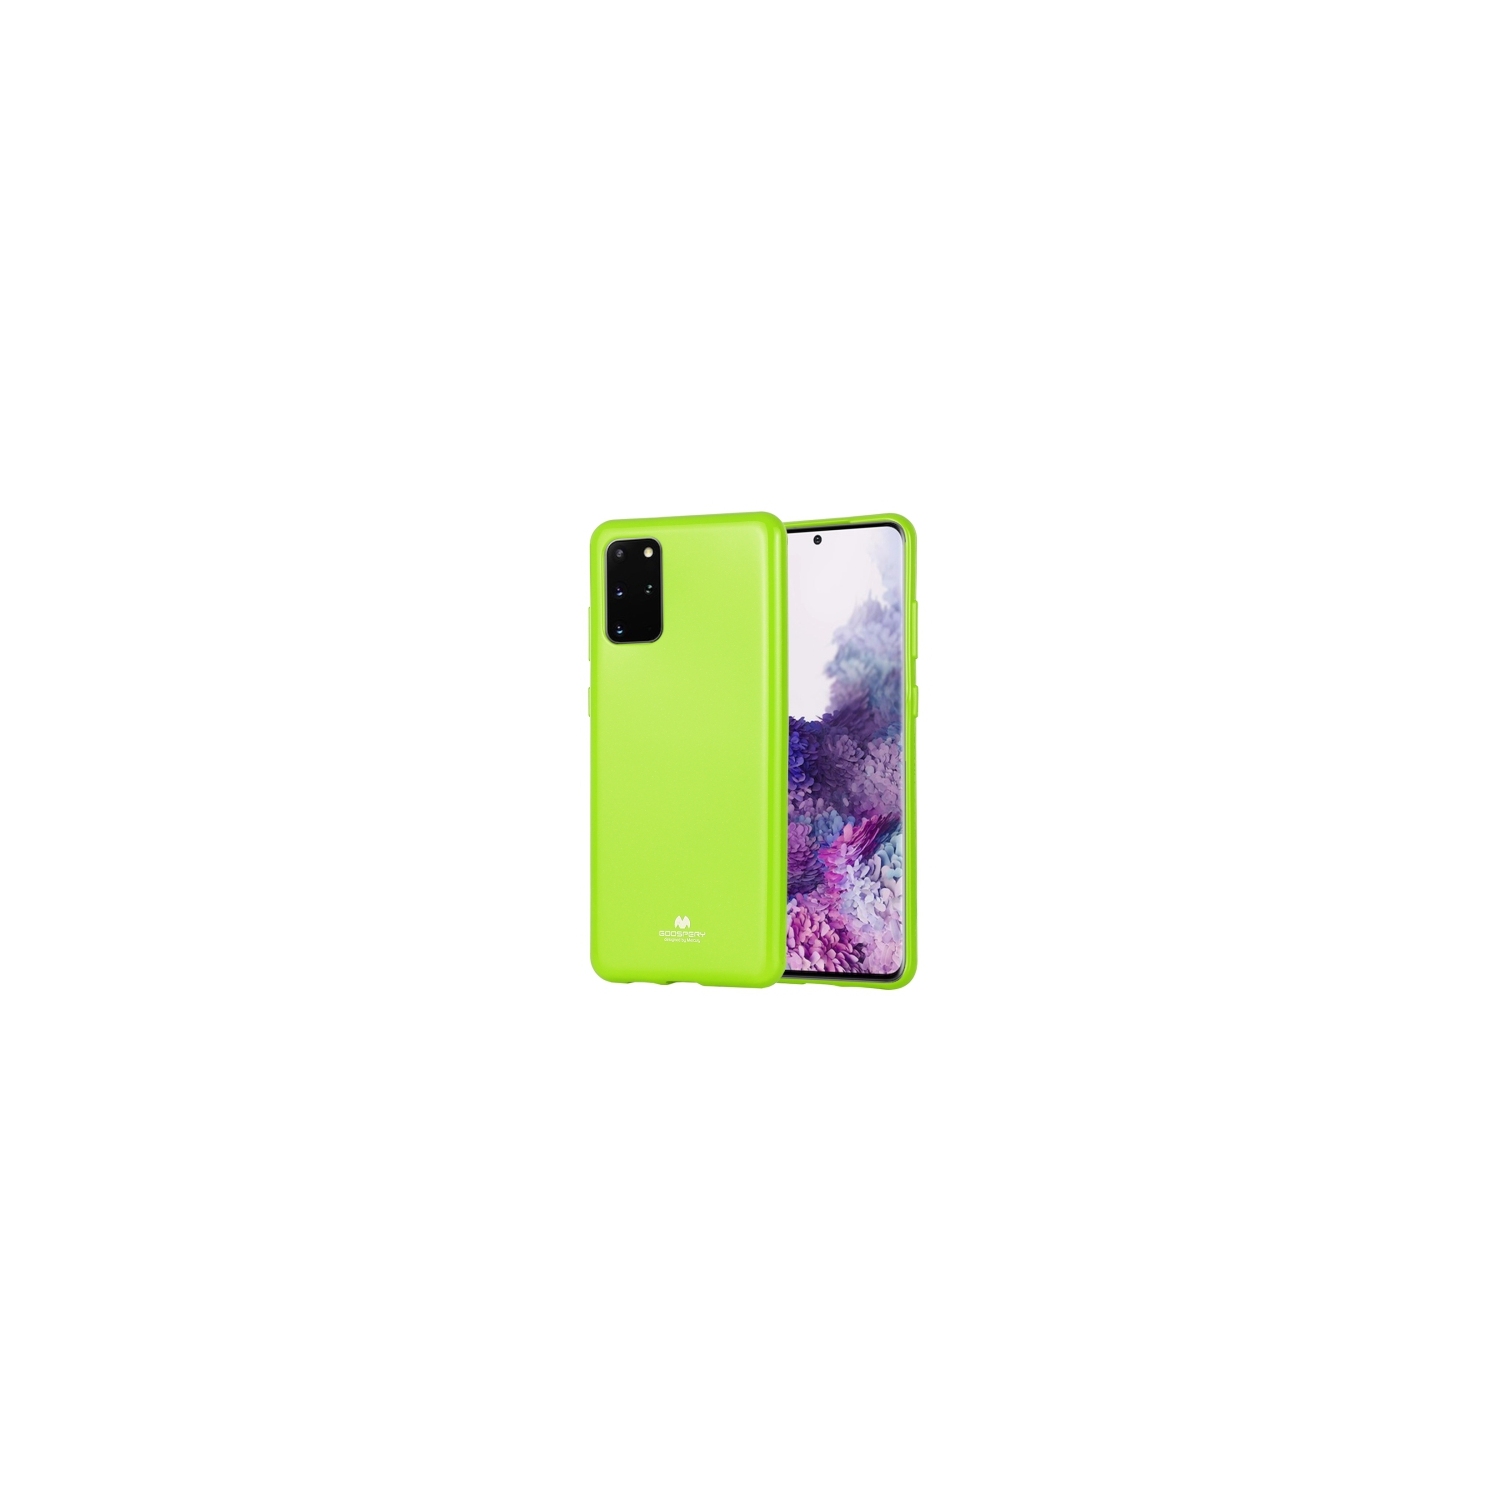 TopSave Goospery Jelly Case For Huawei P40 Pro, Green